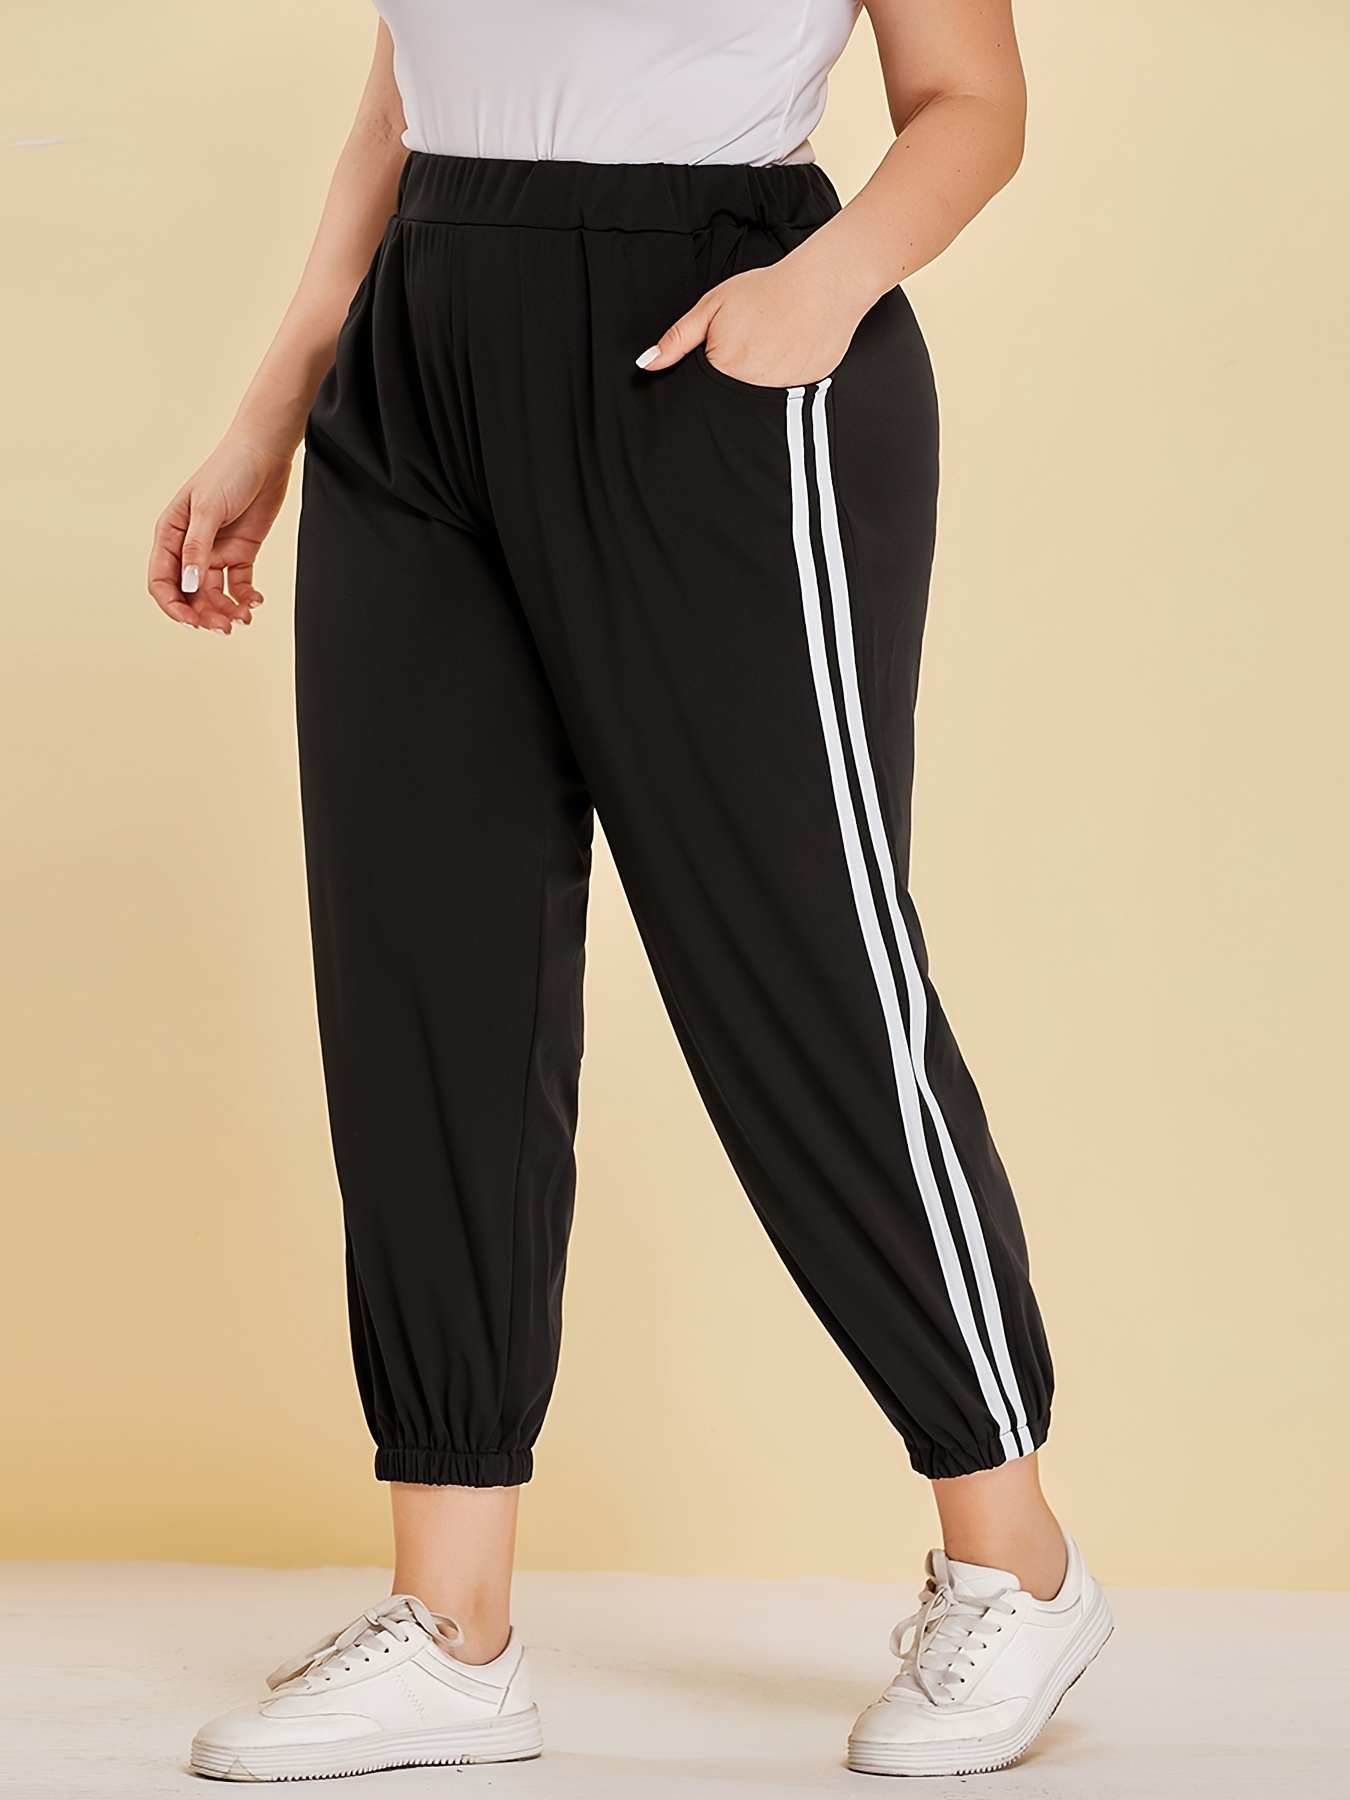 LANBAOSI 2 Pack Women Jogger Pants High Waisted Sweatpants with Pockets  Female Tapered Casual Lounge Pants Loose Track Cuff Leggings Size X-Large 